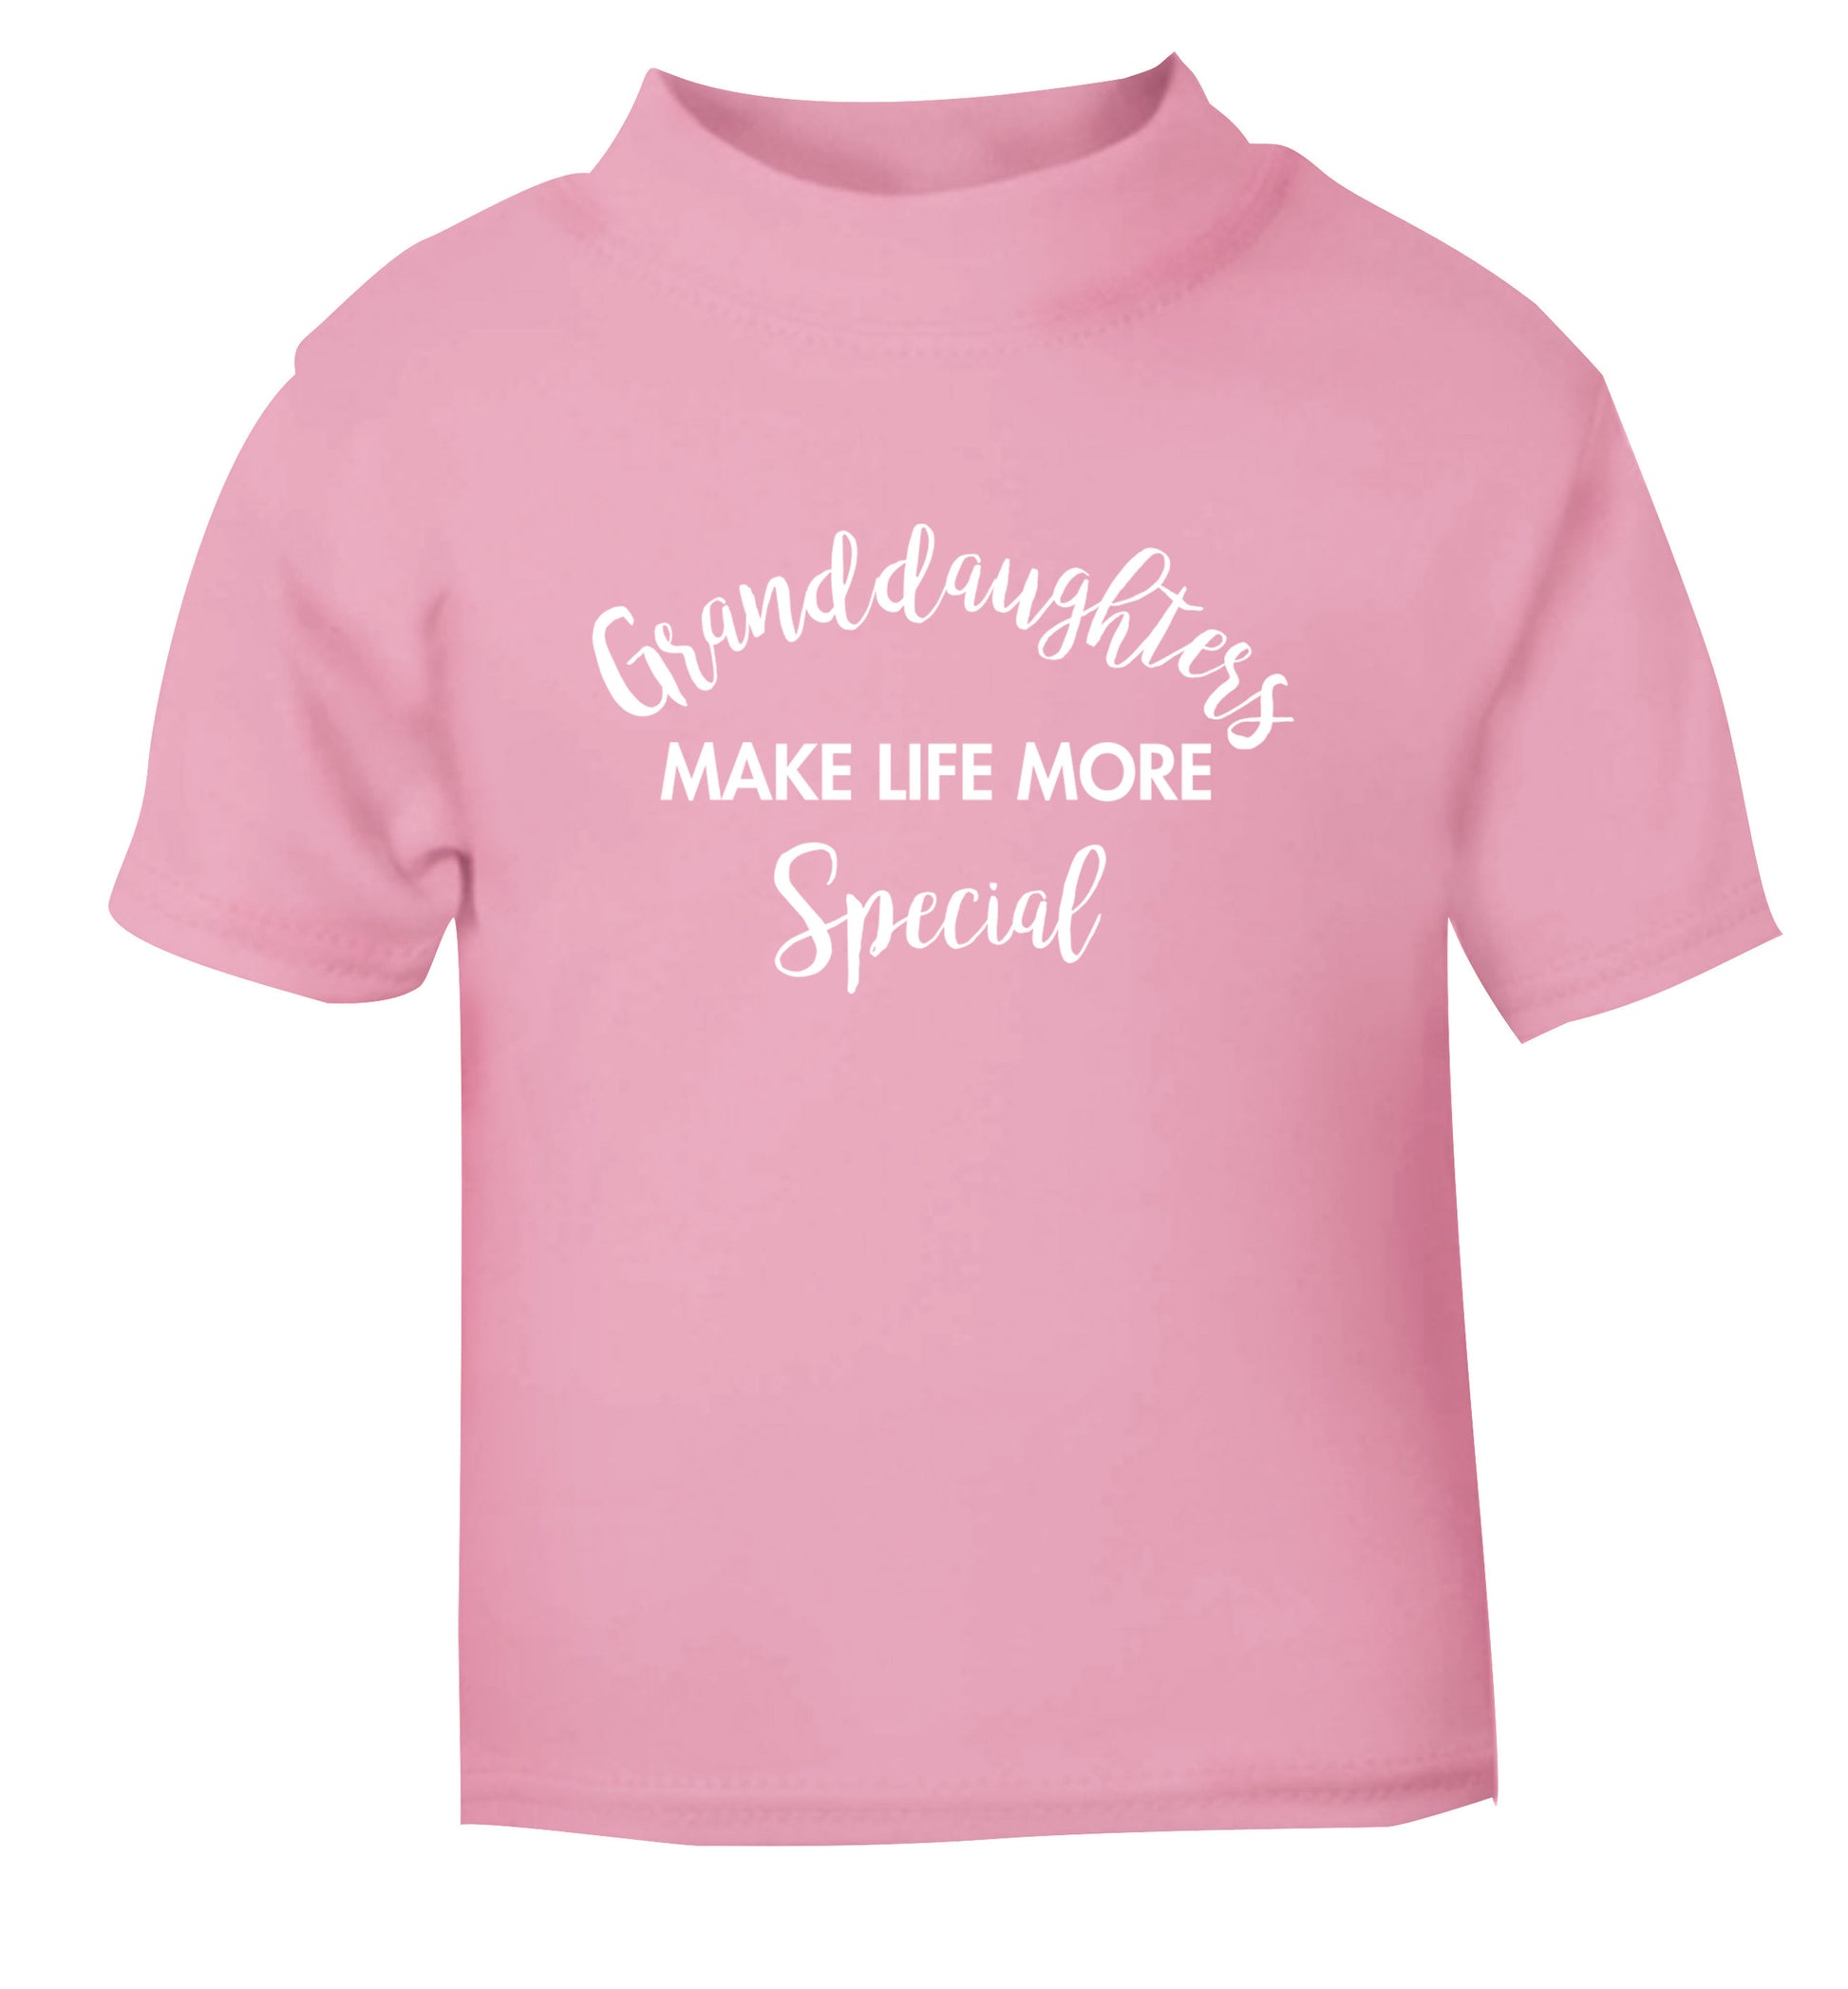 Granddaughters make life more special light pink Baby Toddler Tshirt 2 Years